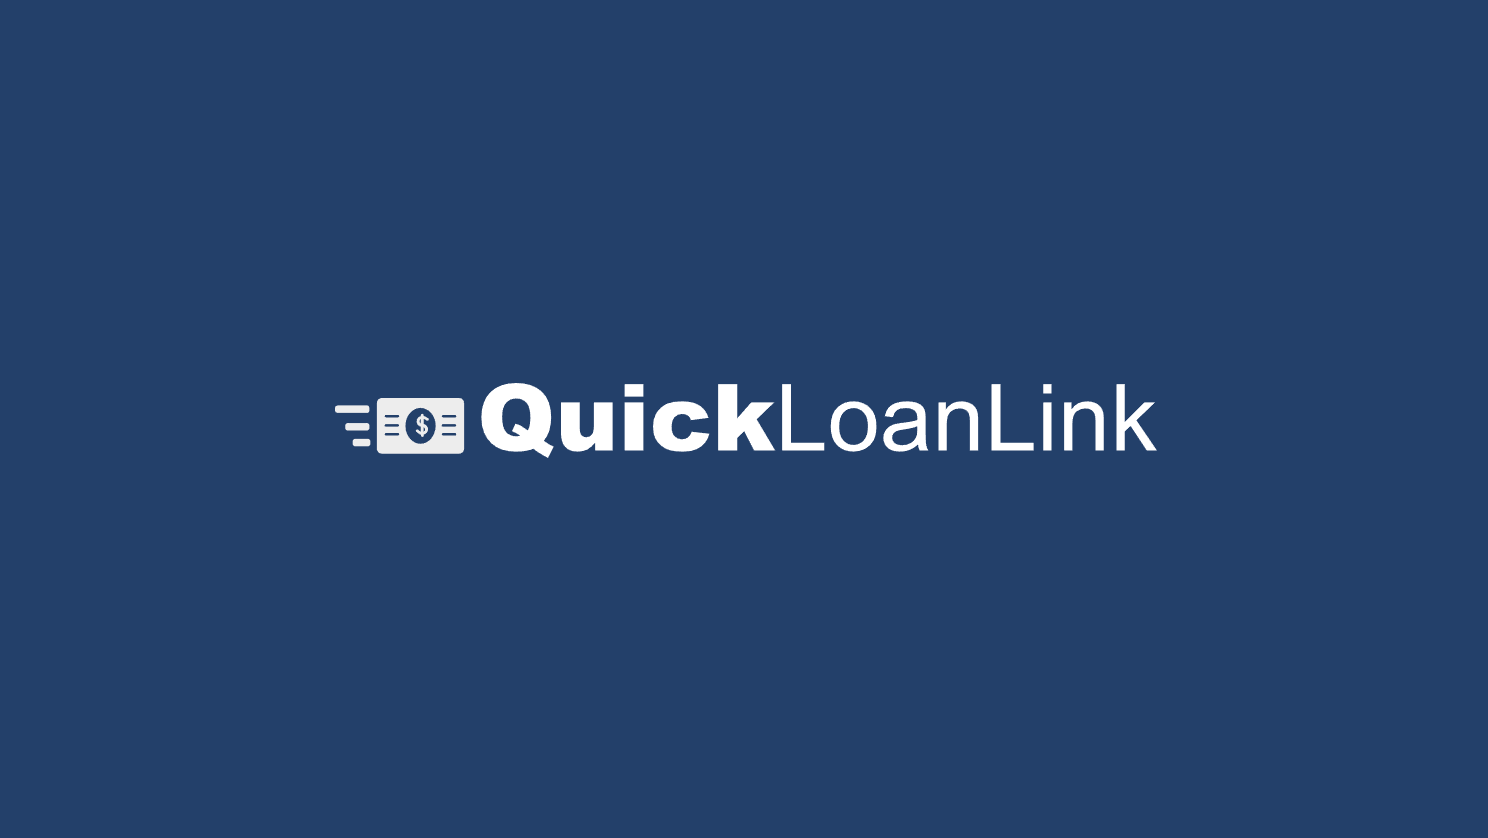 Learn more about this service. Source: Quick Loan Link.